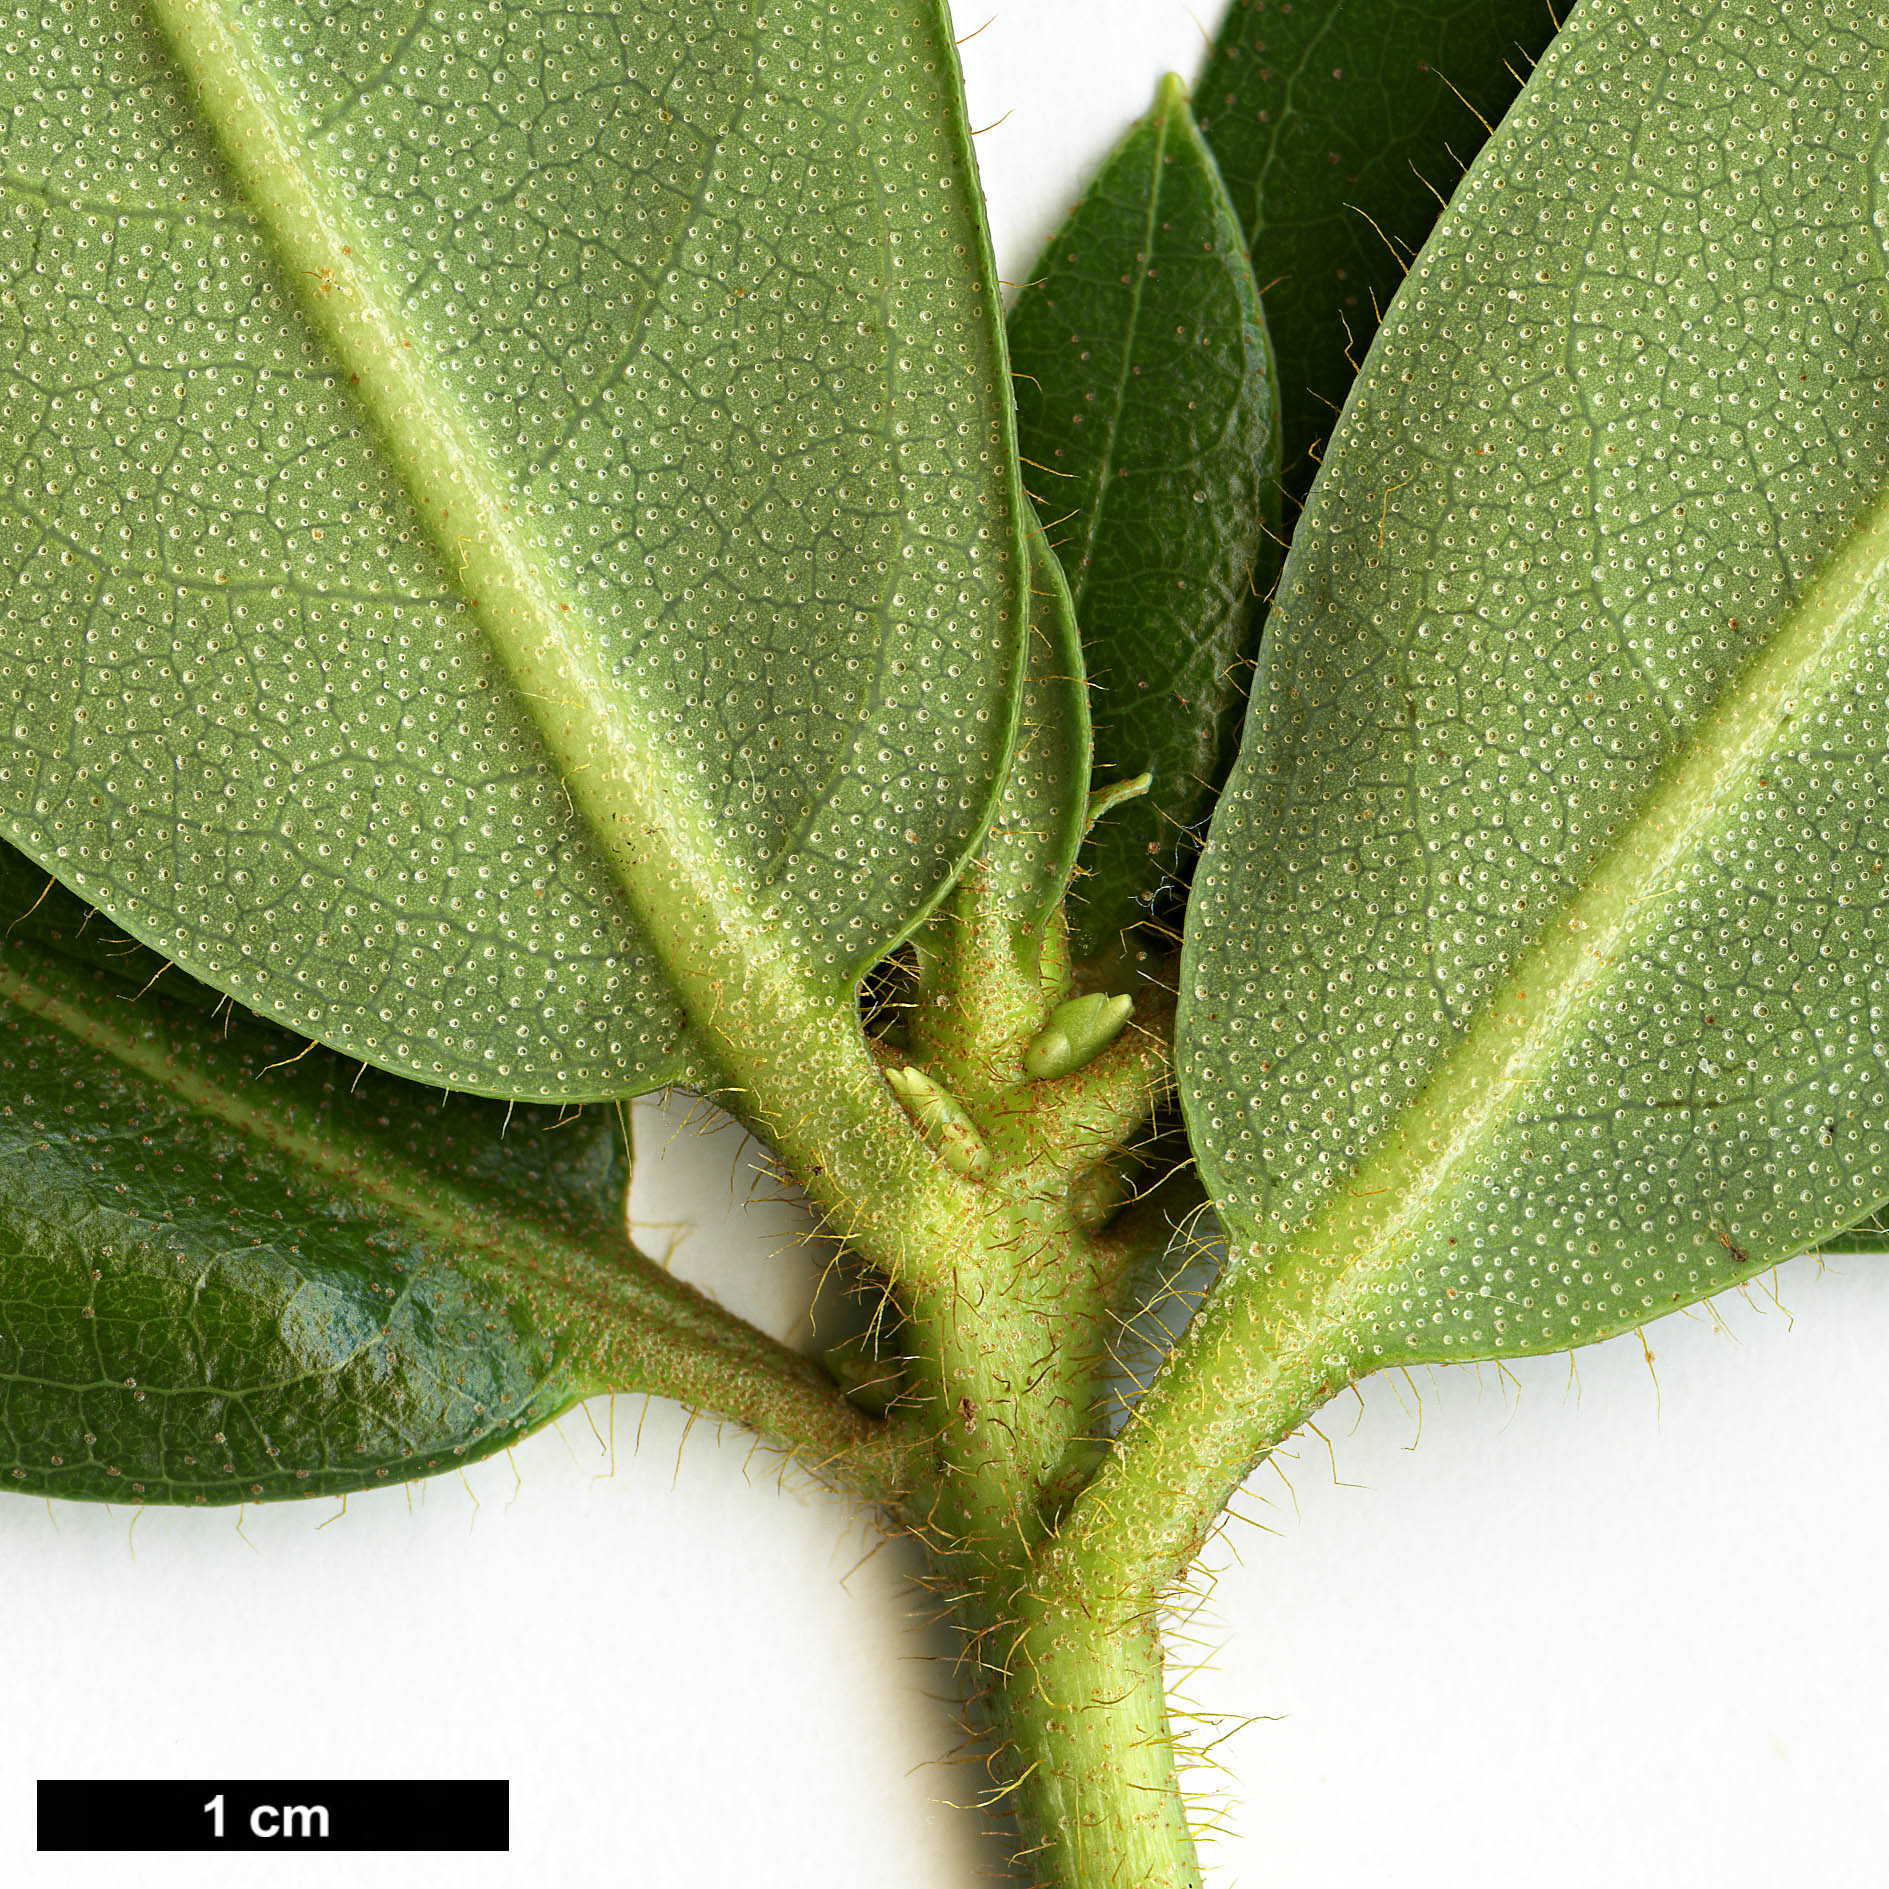 High resolution image: Family: Ericaceae - Genus: Rhododendron - Taxon: aff. lyi